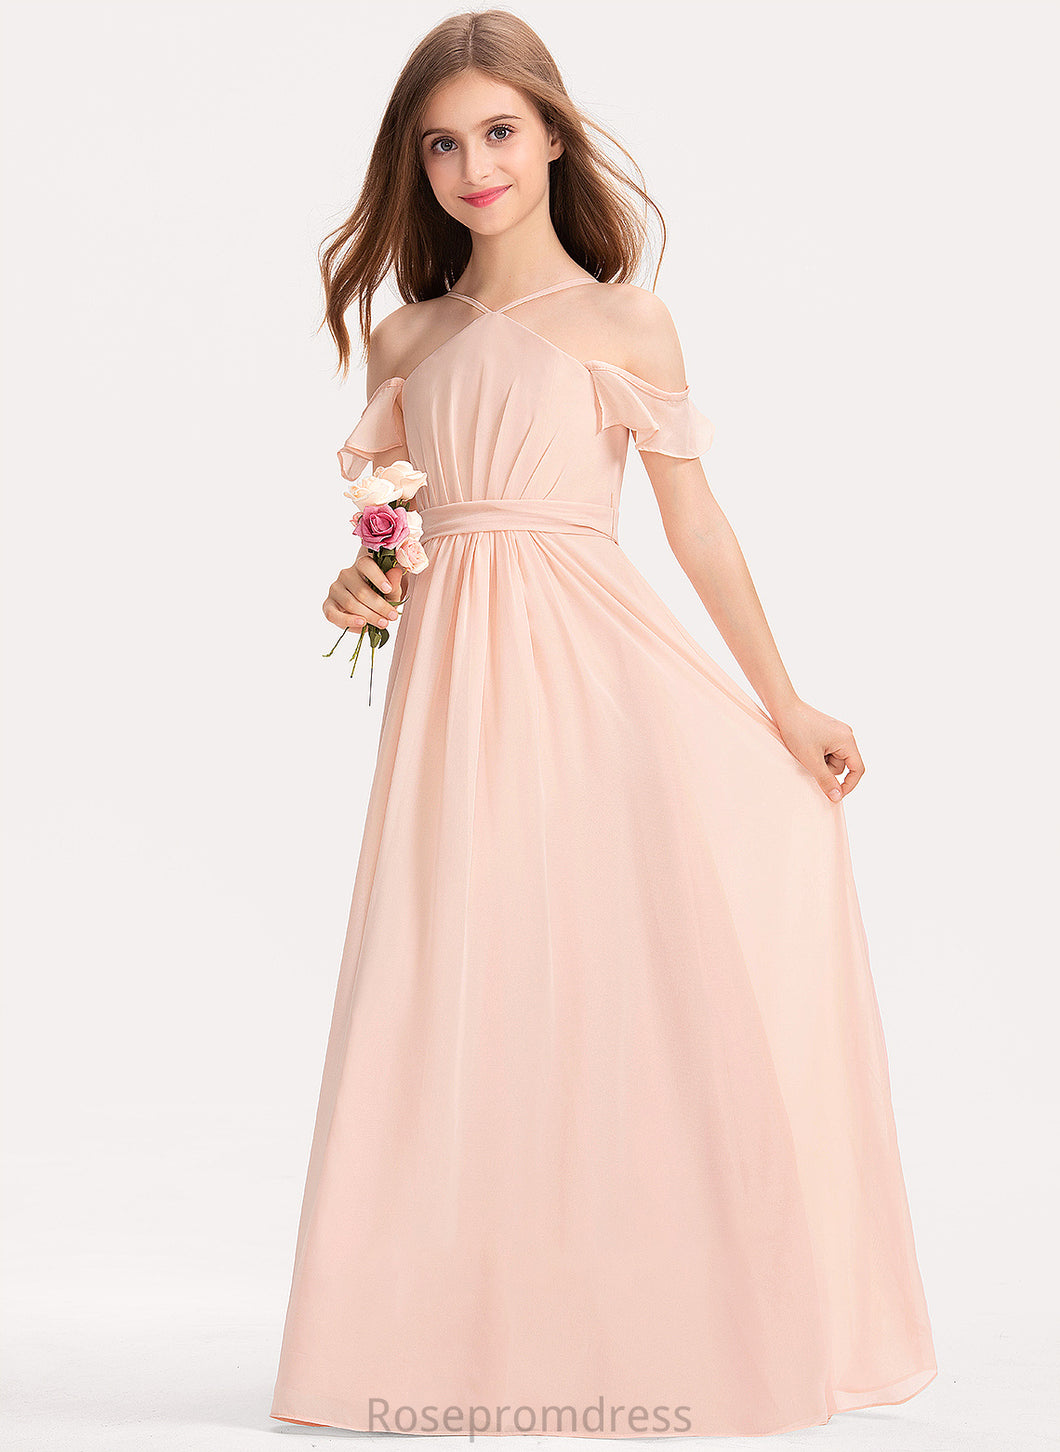 Justice With Junior Bridesmaid Dresses Floor-Length Chiffon Bow(s) Ruffle V-neck A-Line